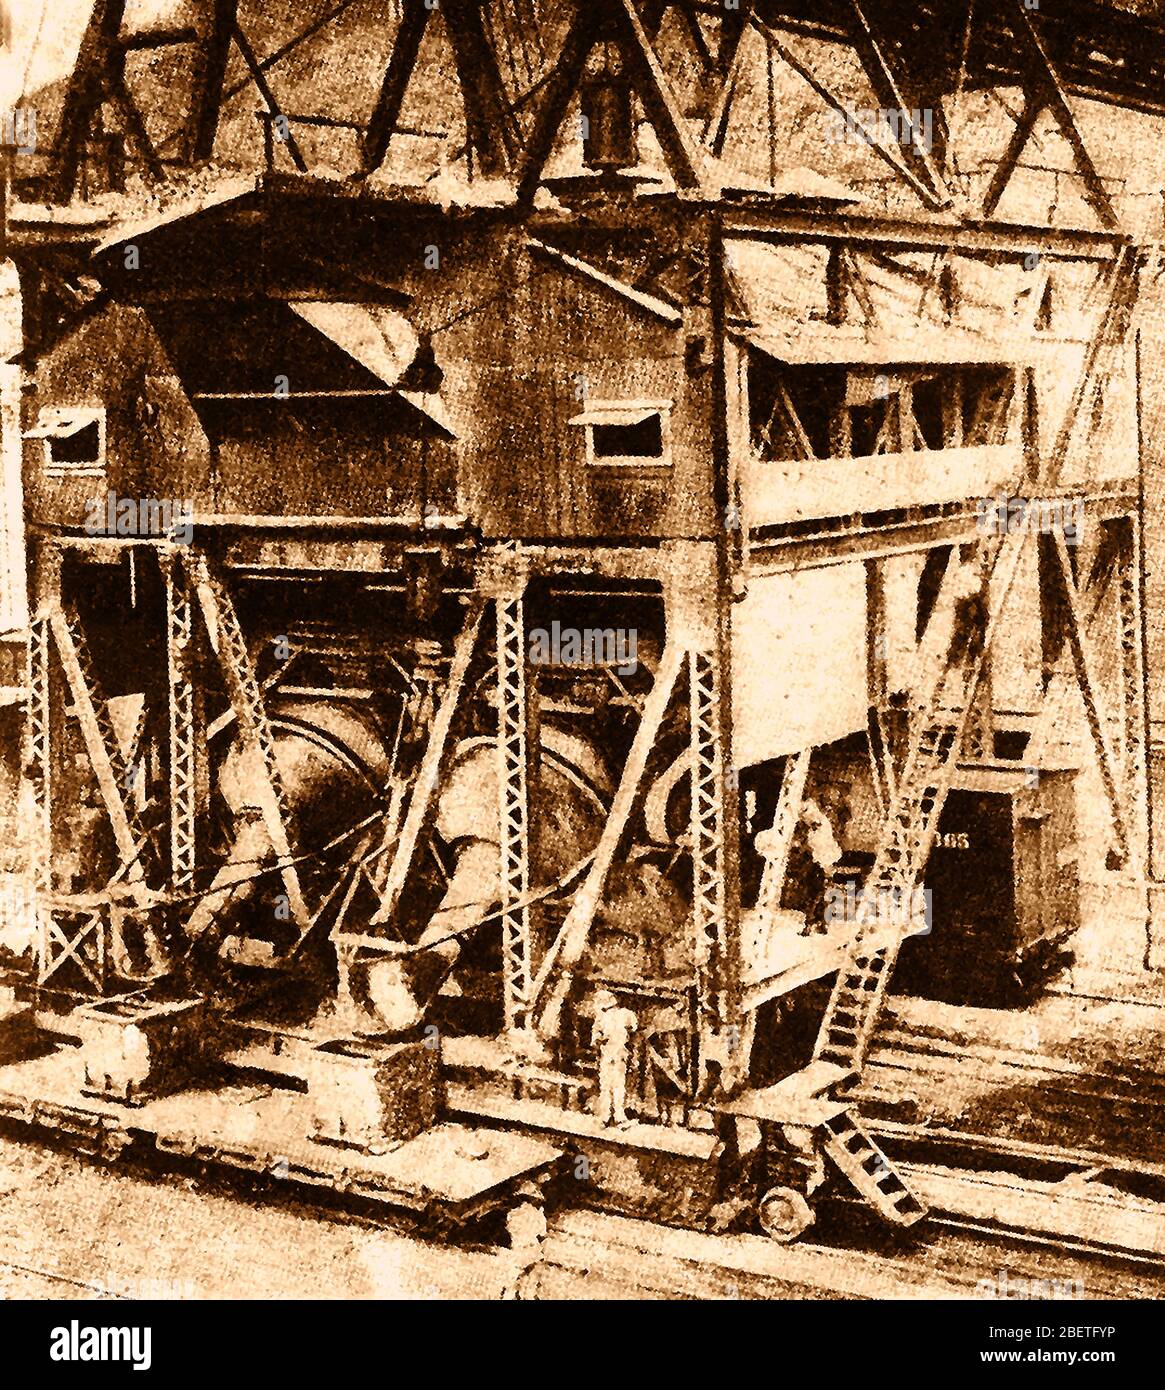 An early printed photograph showing the building of the Panama Canal  - A gigantic concrete mixer with workers on the Gantry. Stock Photo